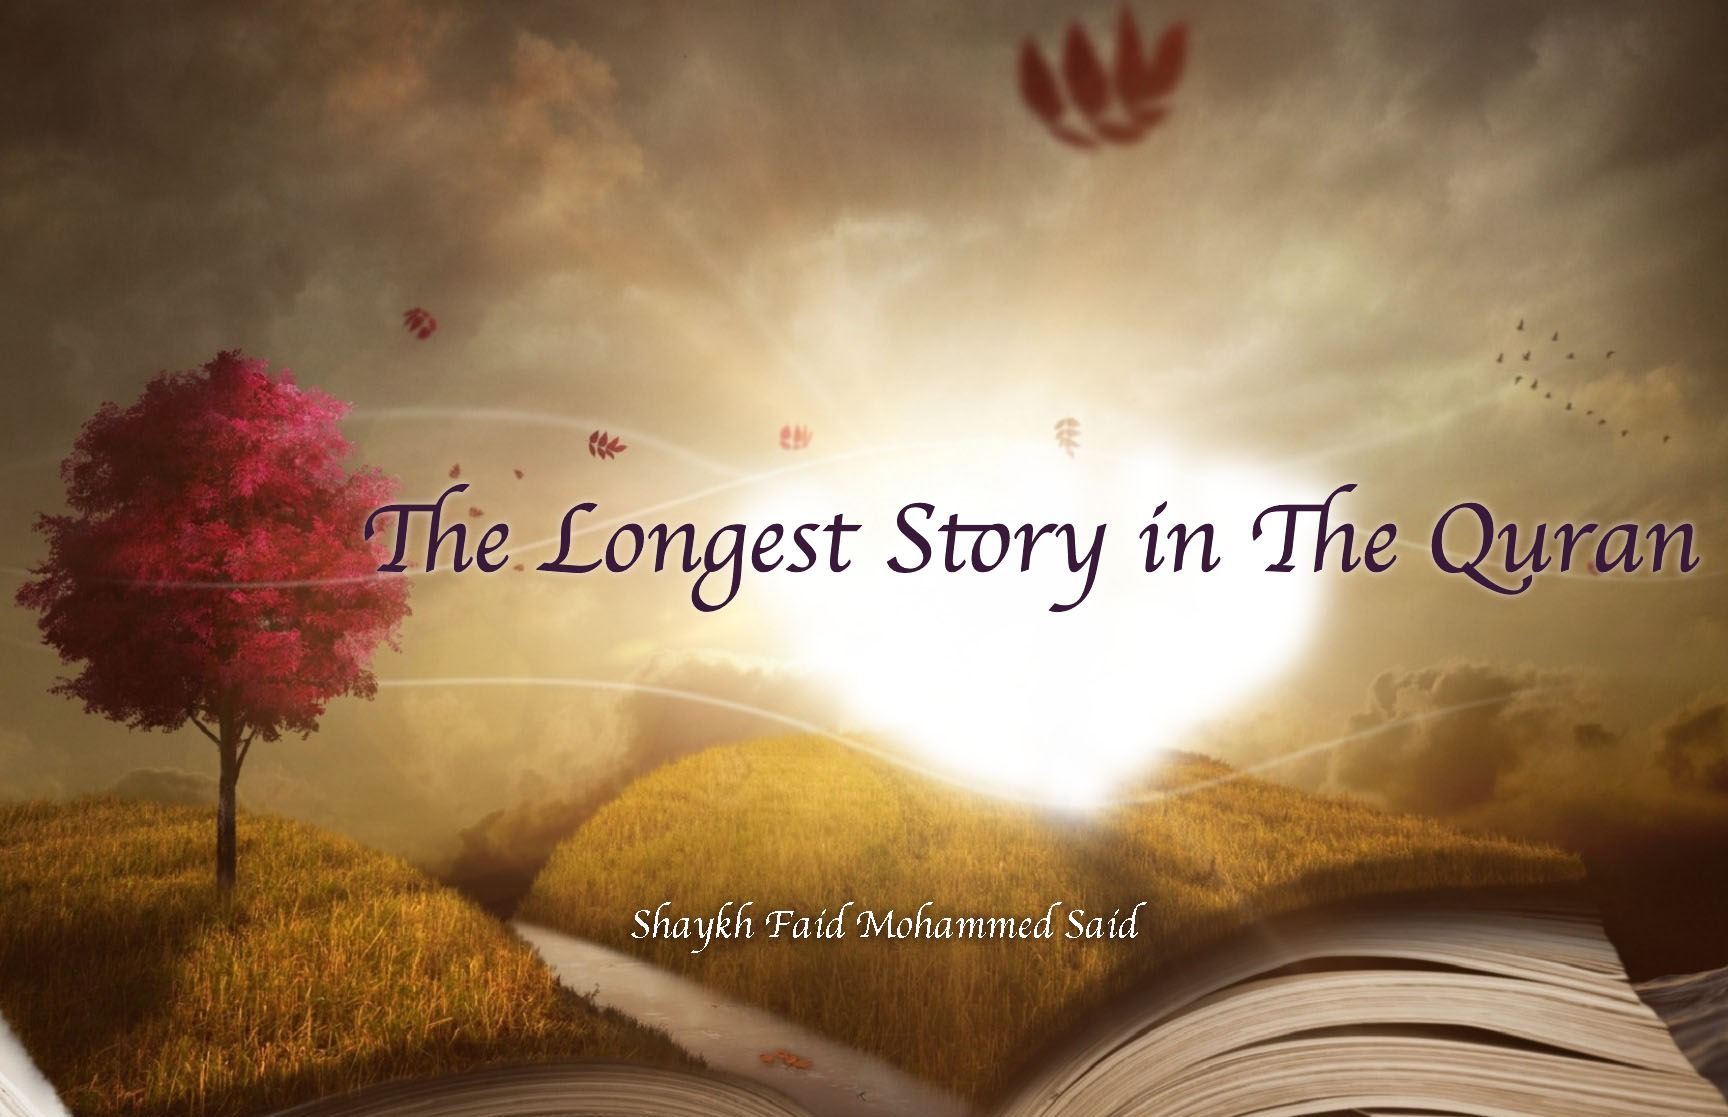 The Longest Story in The Quran